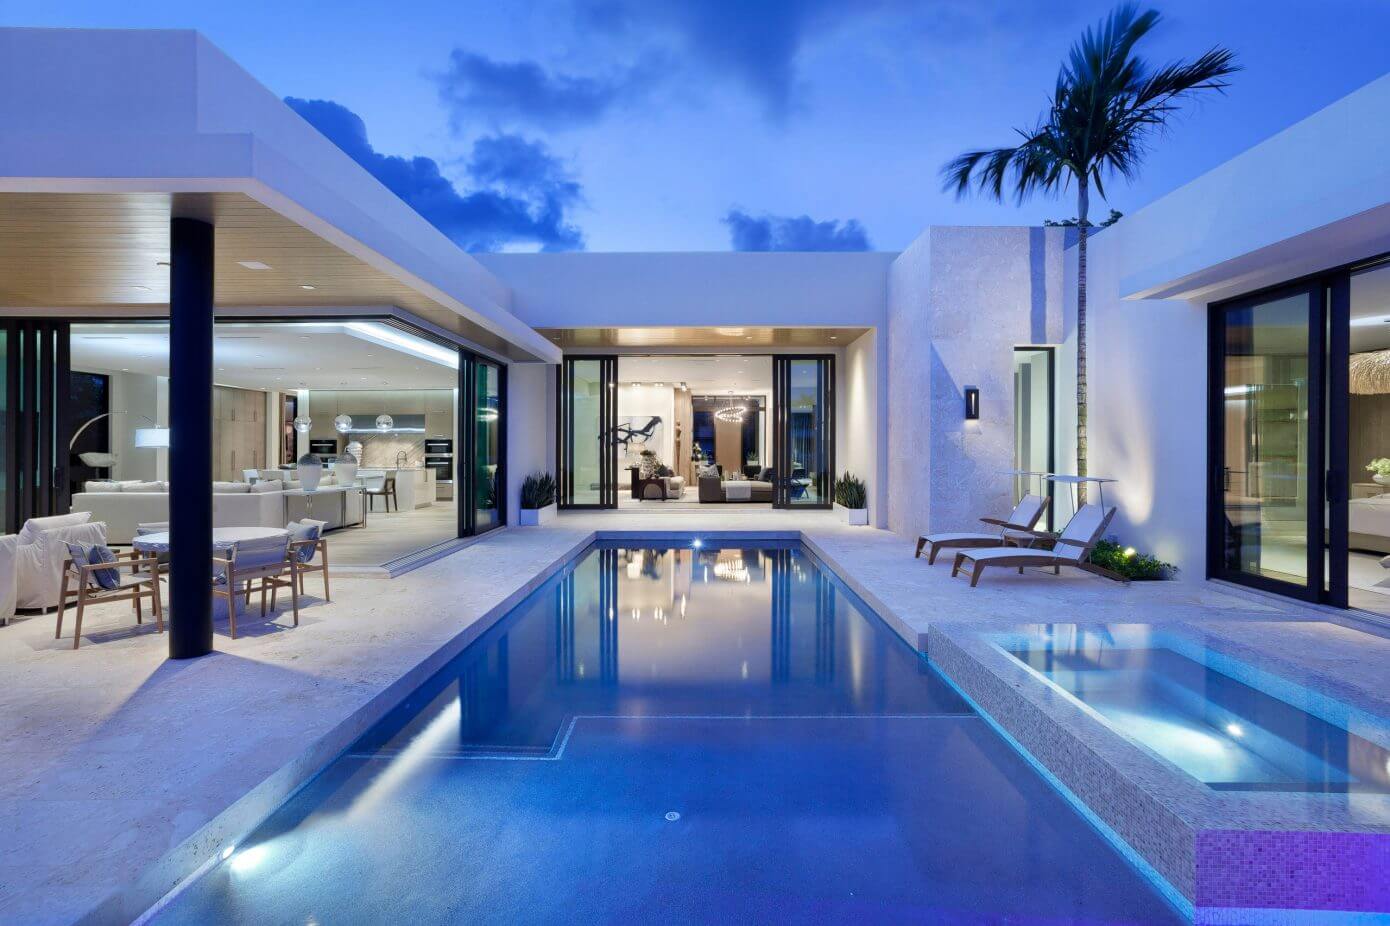 Home in Boca Raton by Brenner Architecture Group | HomeAdore - 1390 x 926 jpeg 129kB